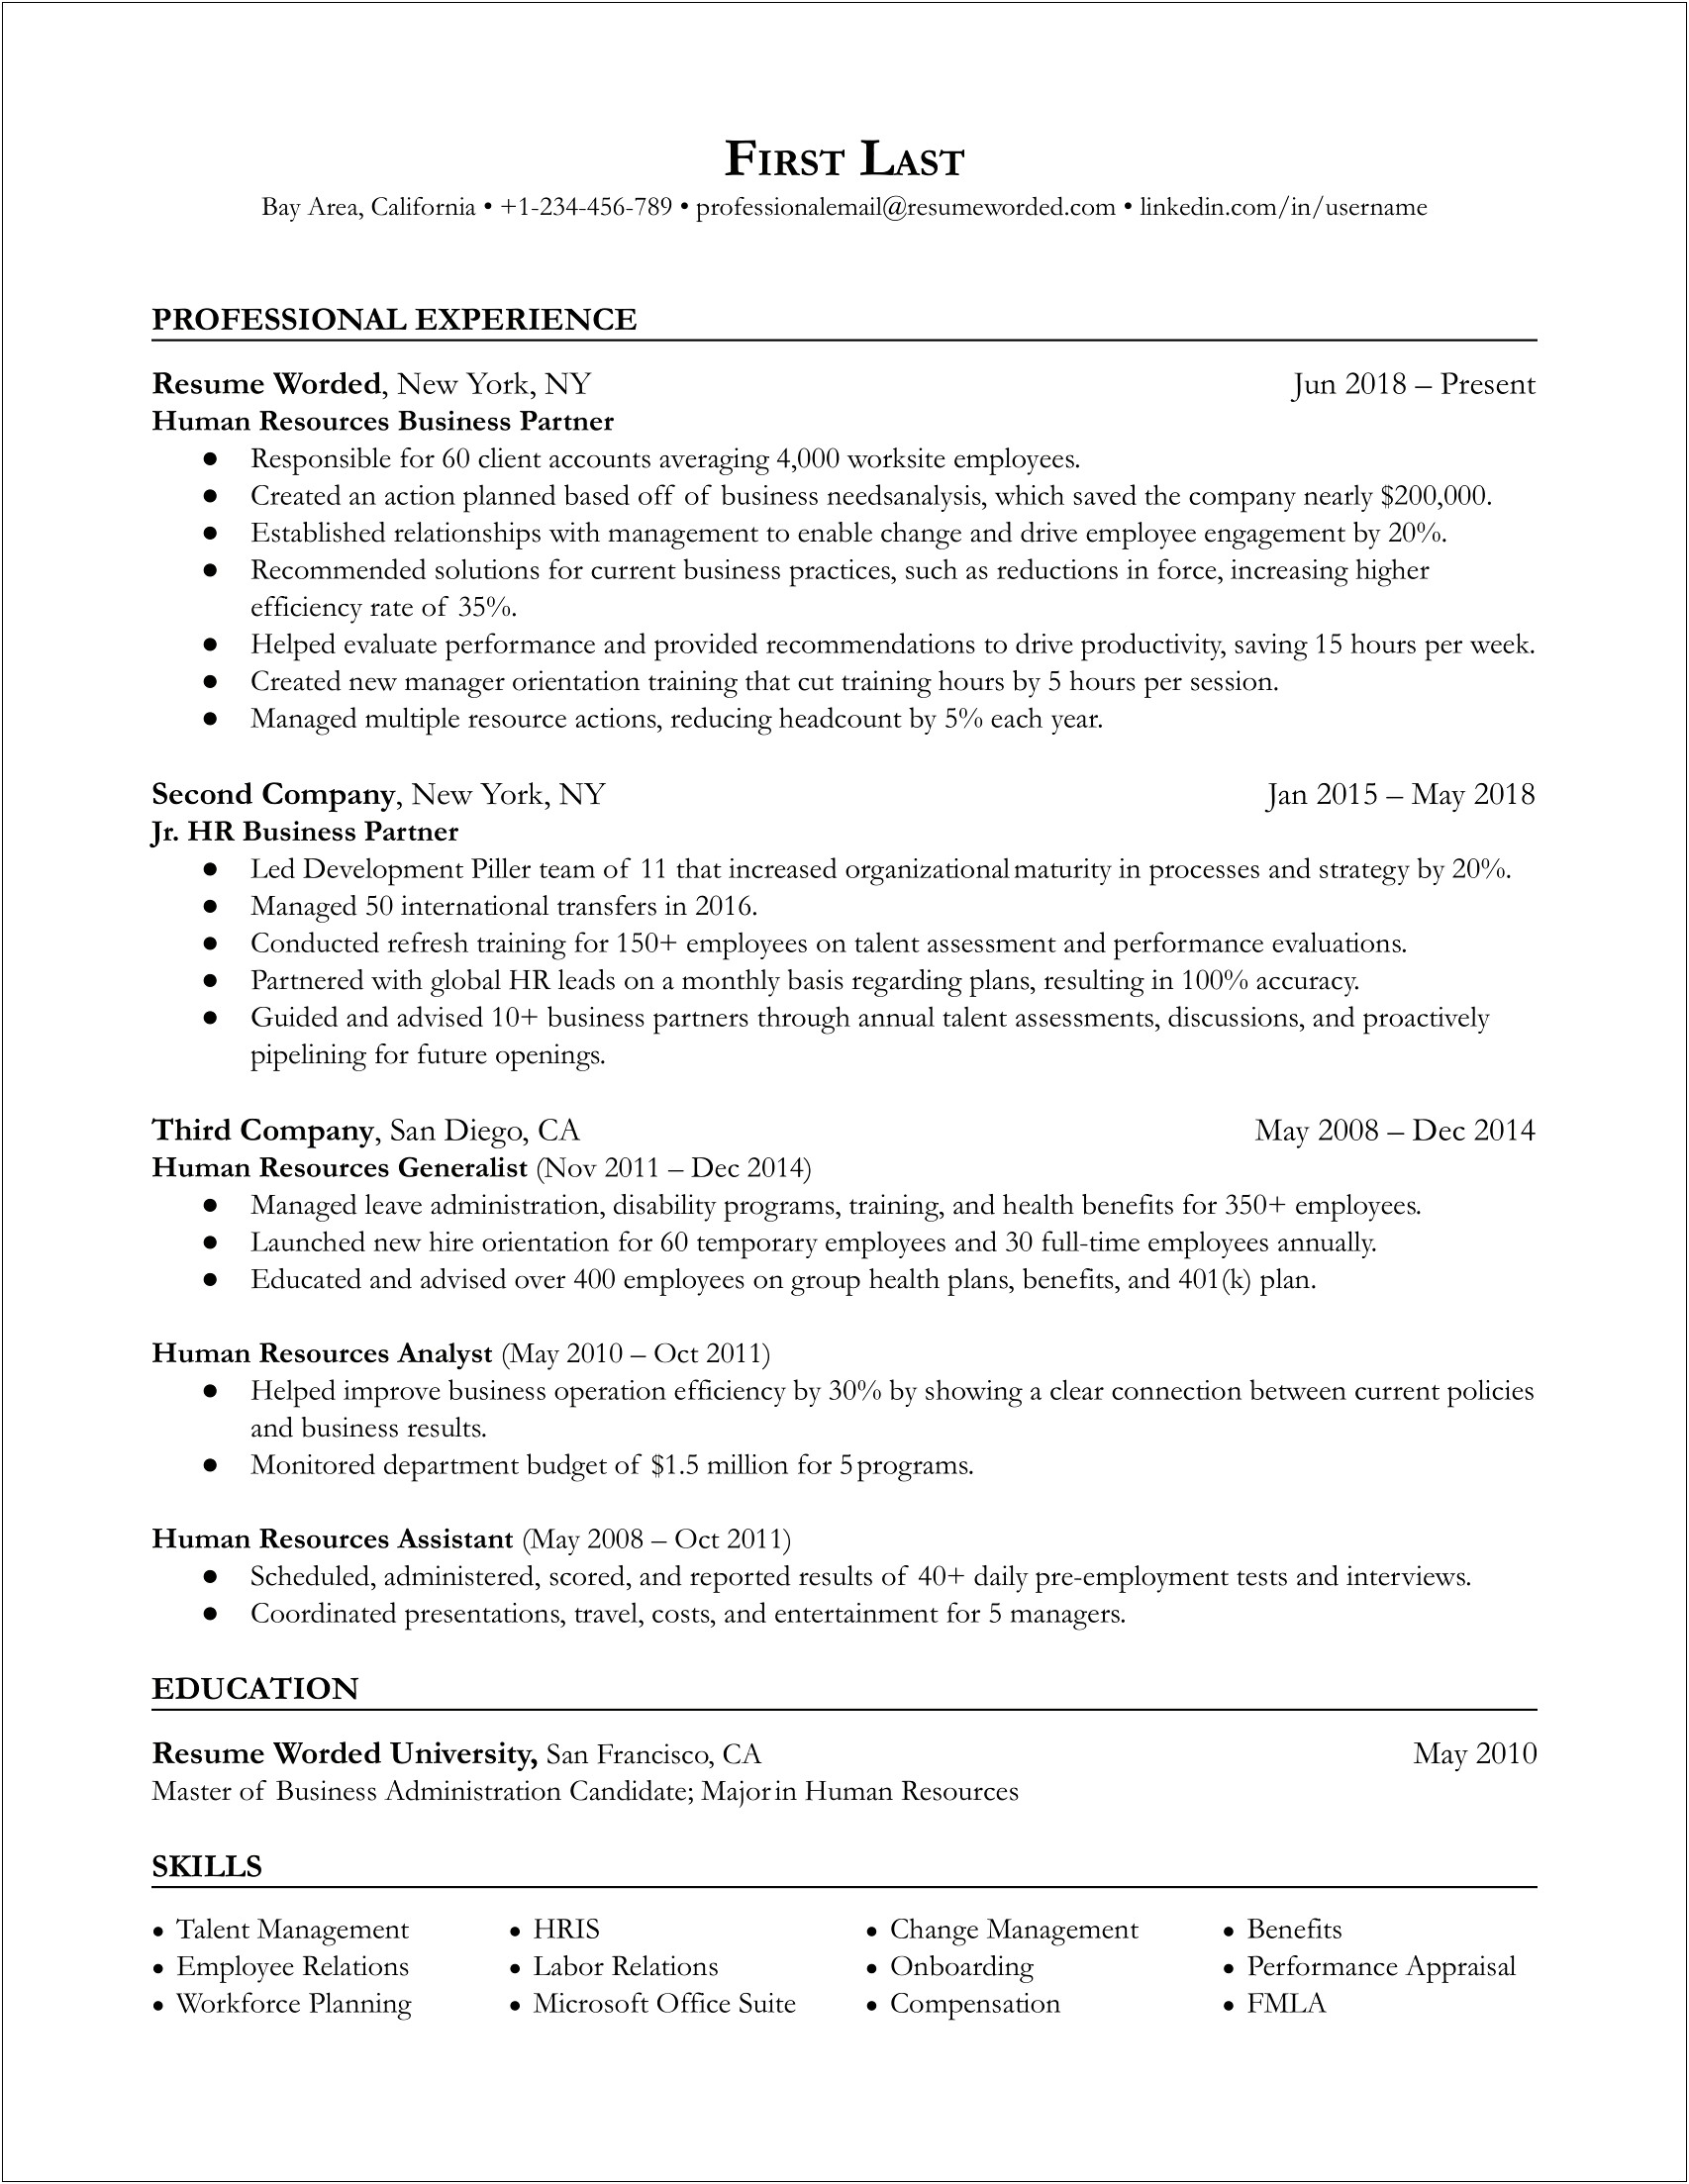 Human Resources Business Partner Resume Objectives